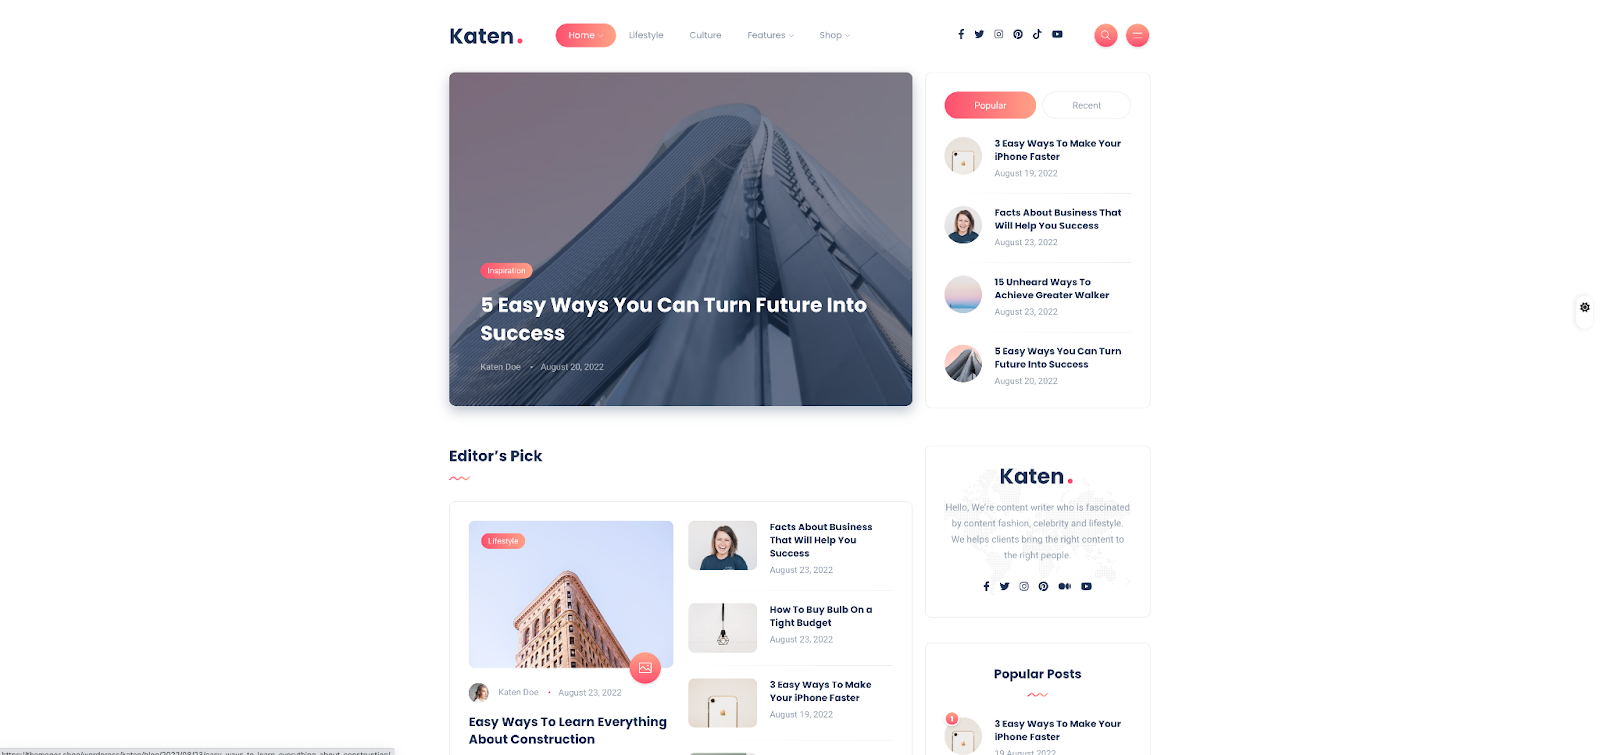 Katen is a flexible WordPress template that you can use for your blog or business website